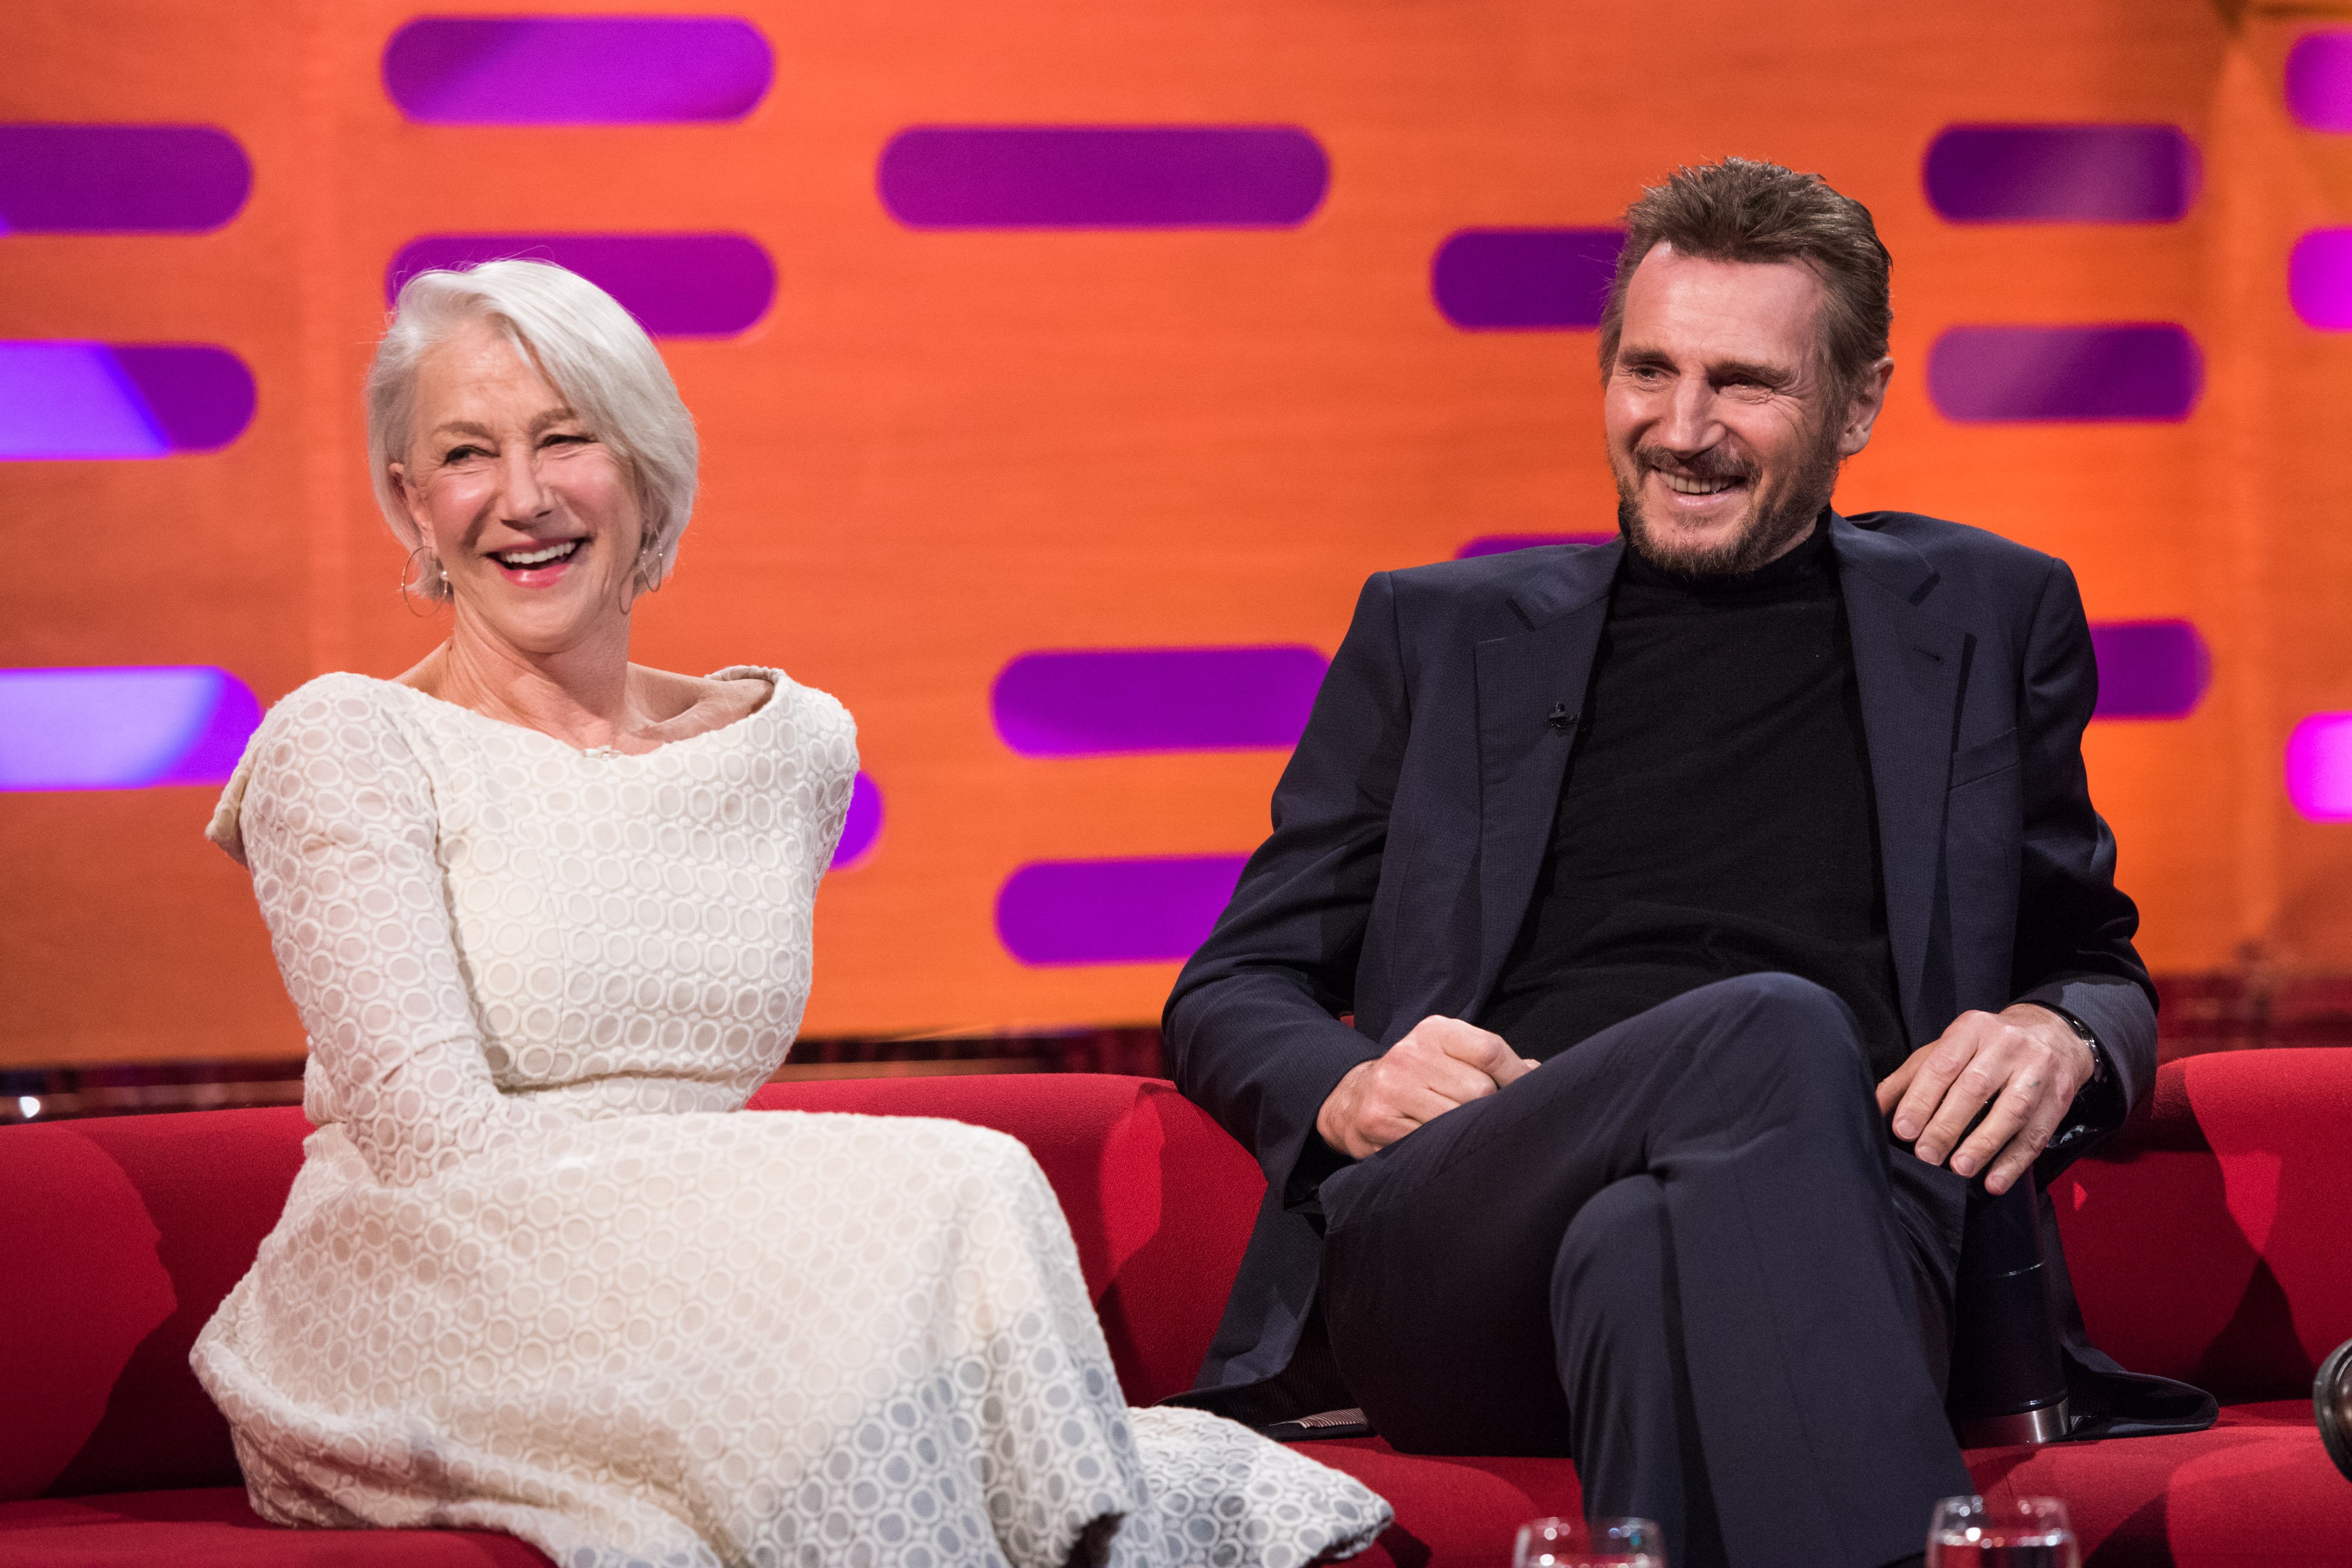 Hollywood A-Listers Helen Mirren and Liam Neeson during an appearance on the "Graham Norton Show" at The London Studios, south London. / Source: Getty Images